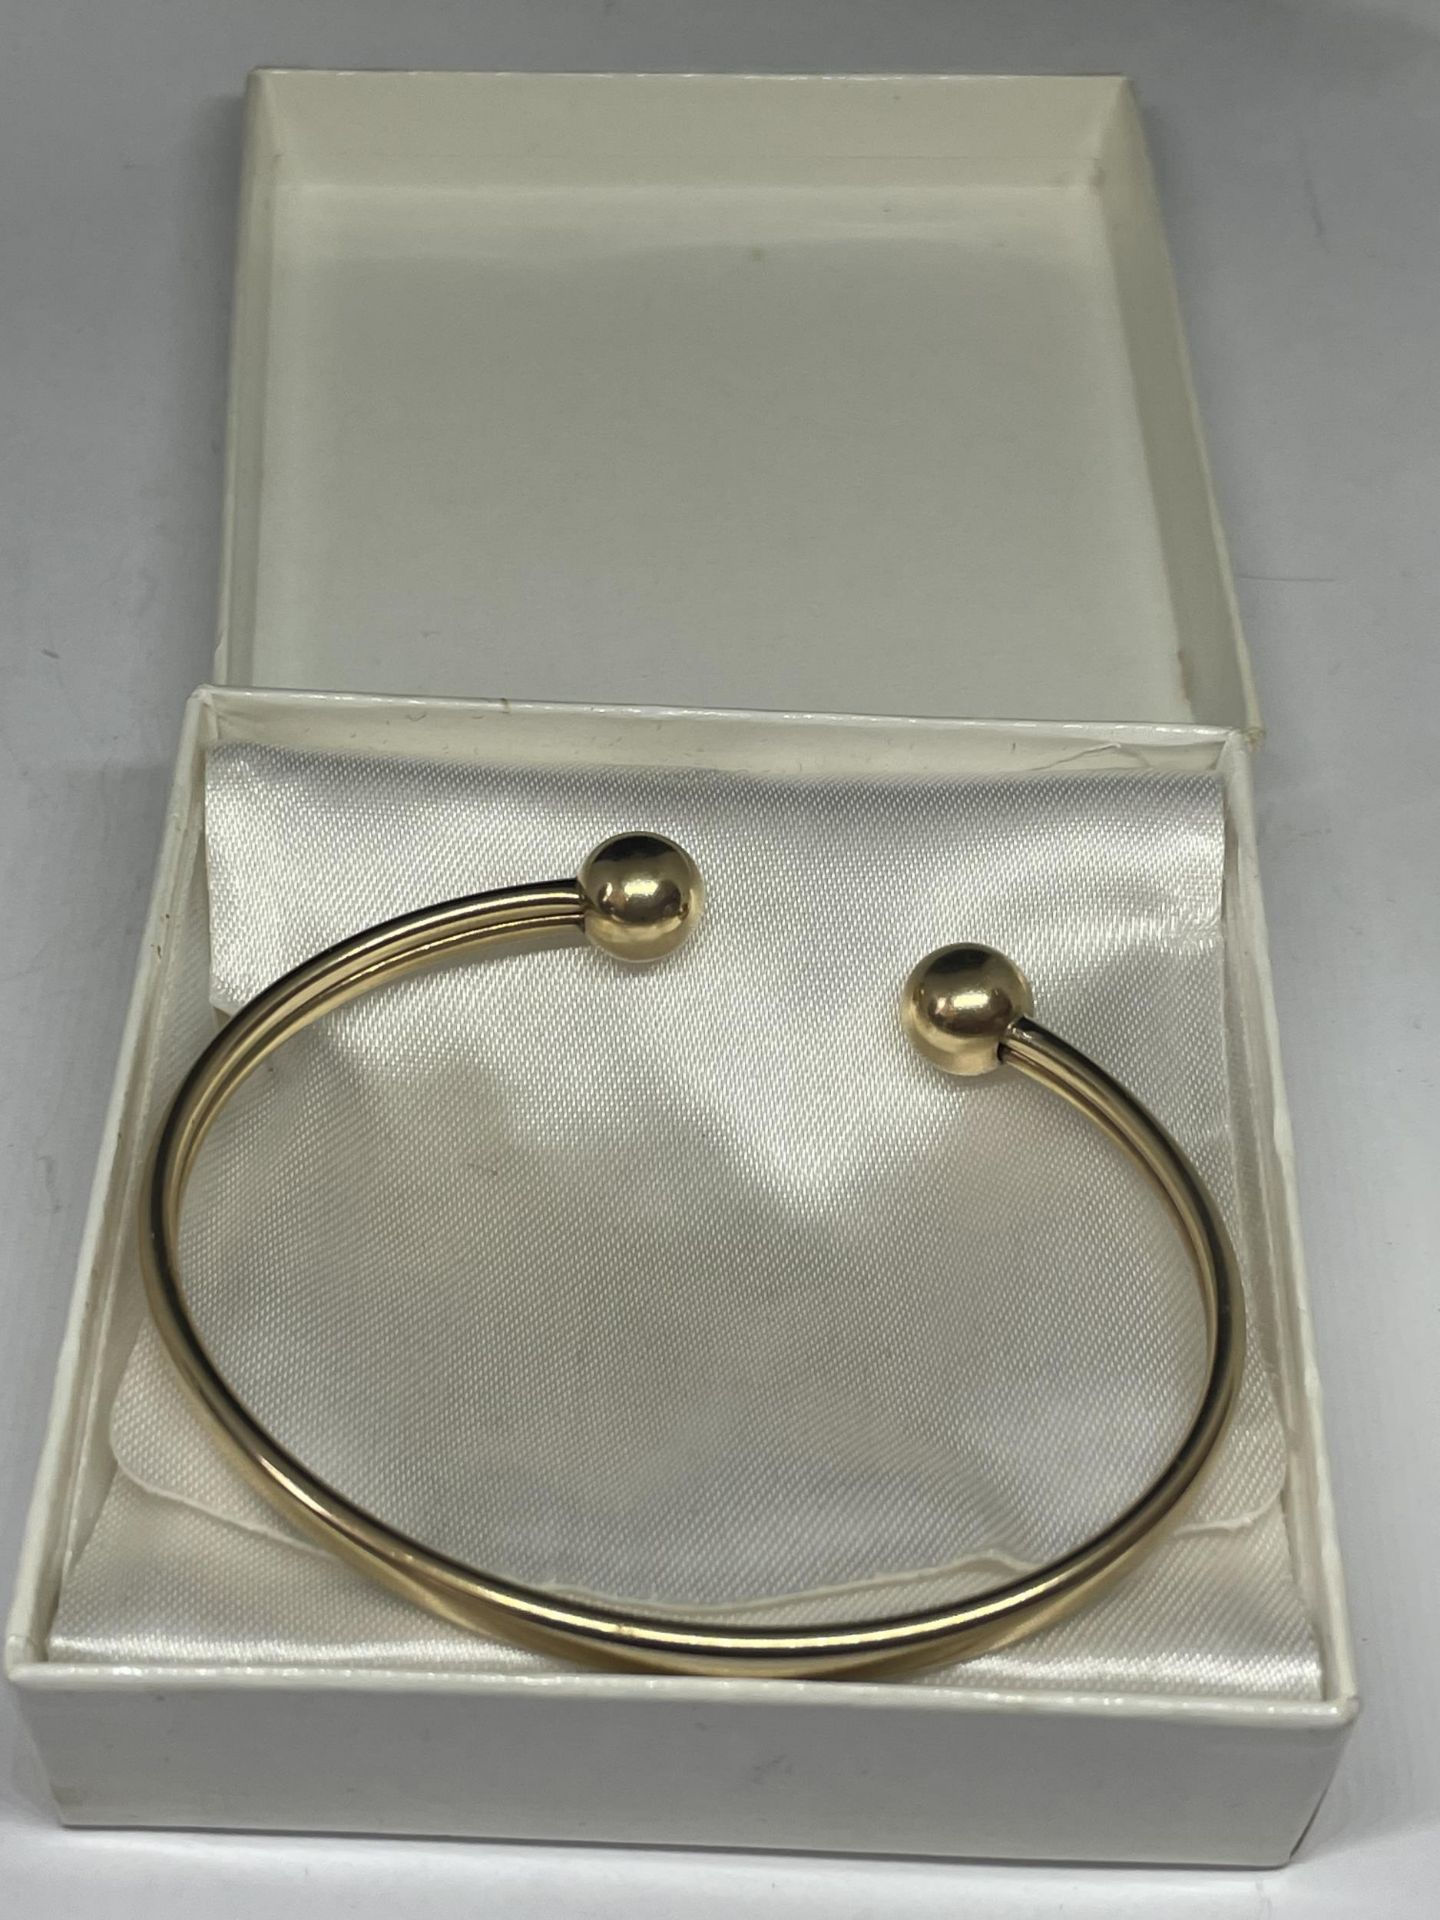 A 9 CARAT GOLD BANGLE GROSS WEIGHT 9.06 GRAMS WITH A PRESENTATION BOX - Image 4 of 4